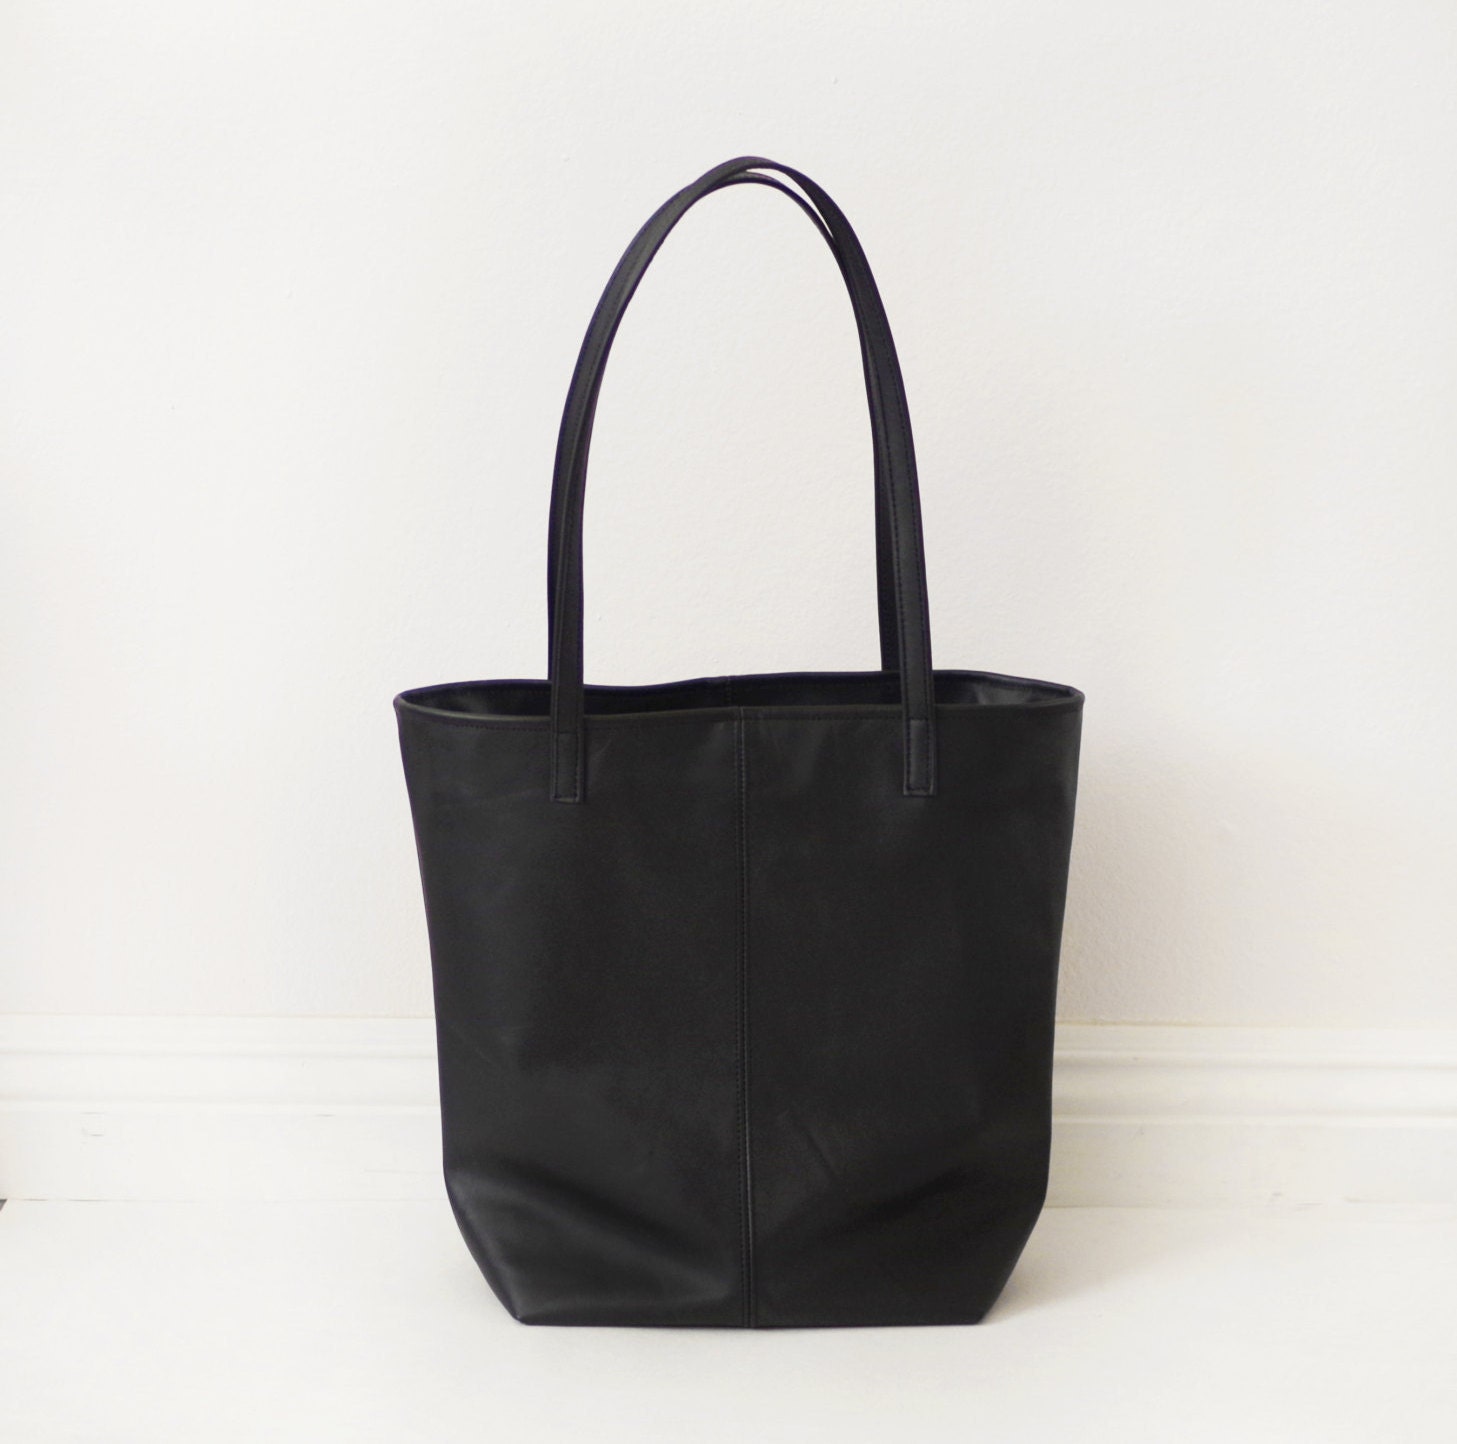 Soft black simple leather tote bag